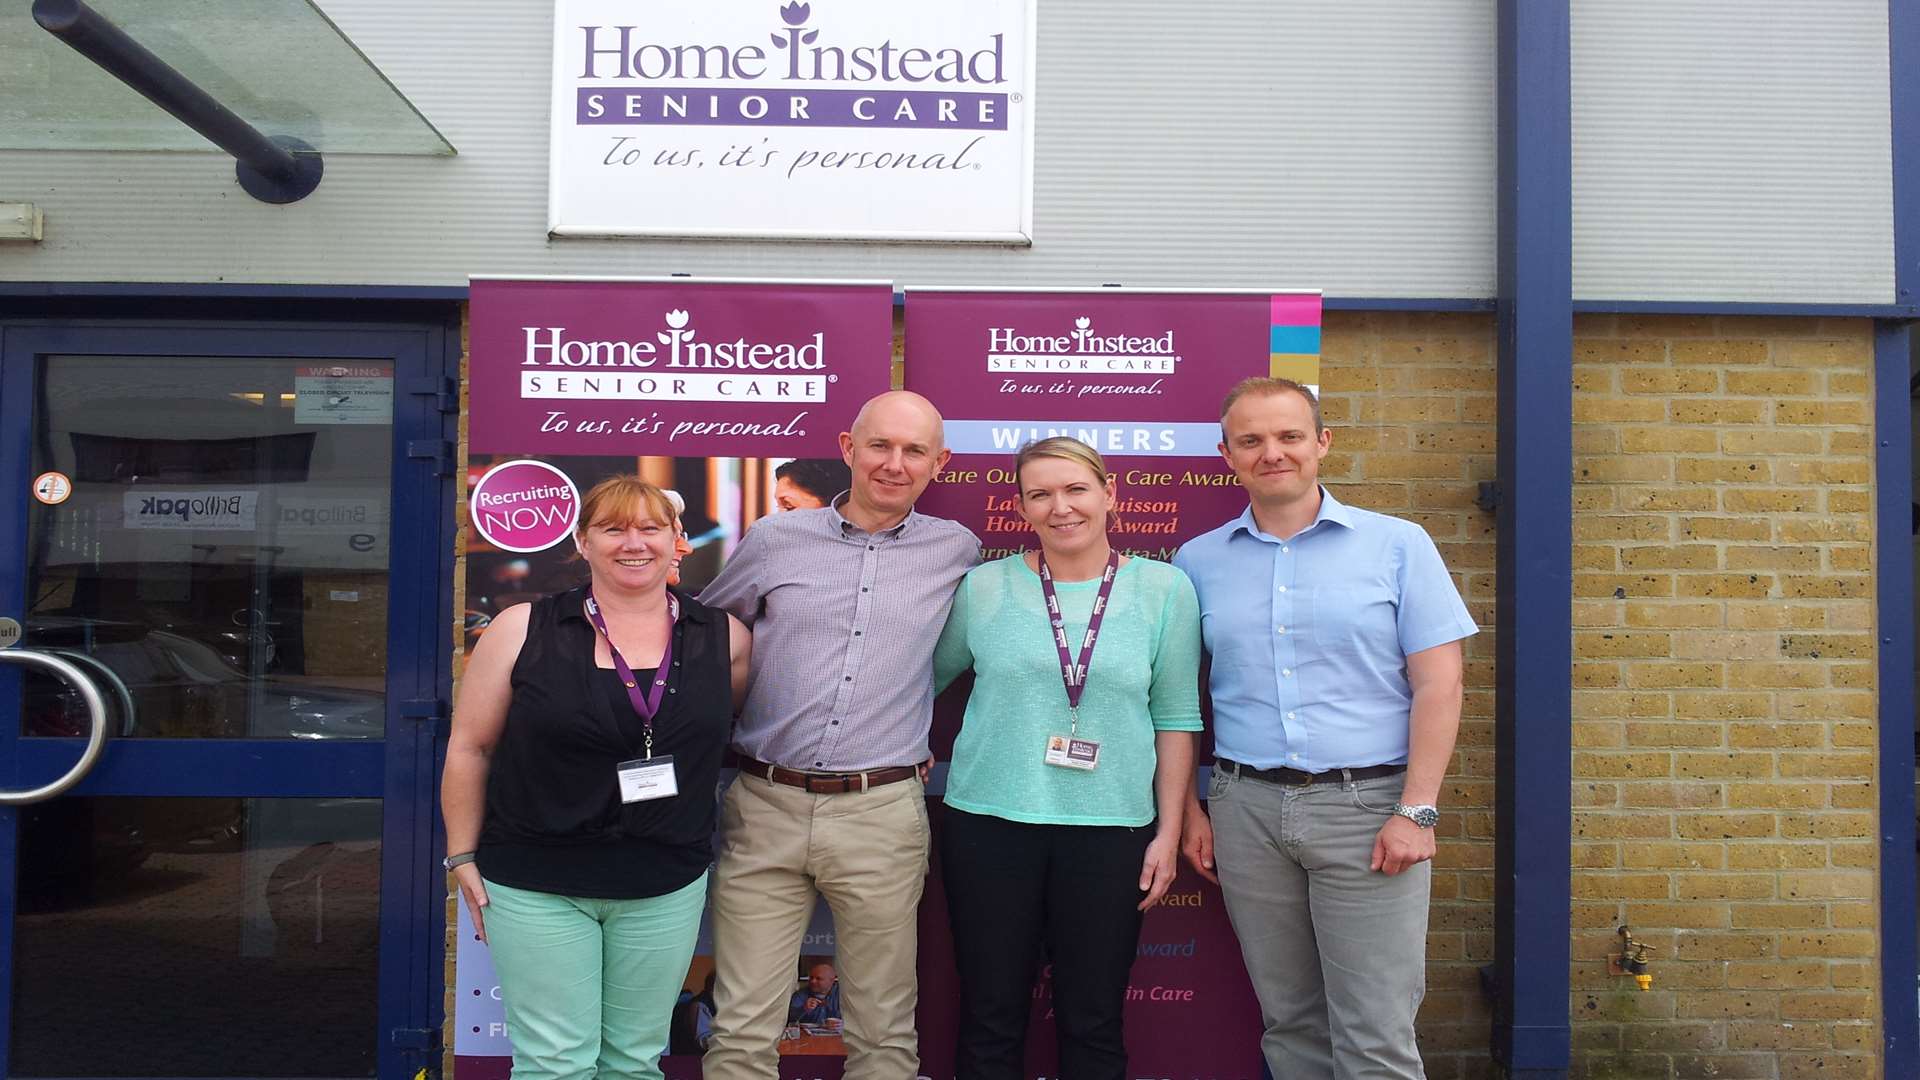 Jane Hillman, Andy Craig, the co-owner of Home Instead Senior Care, Lisa Newton and fellow co-owner Mark Craig.